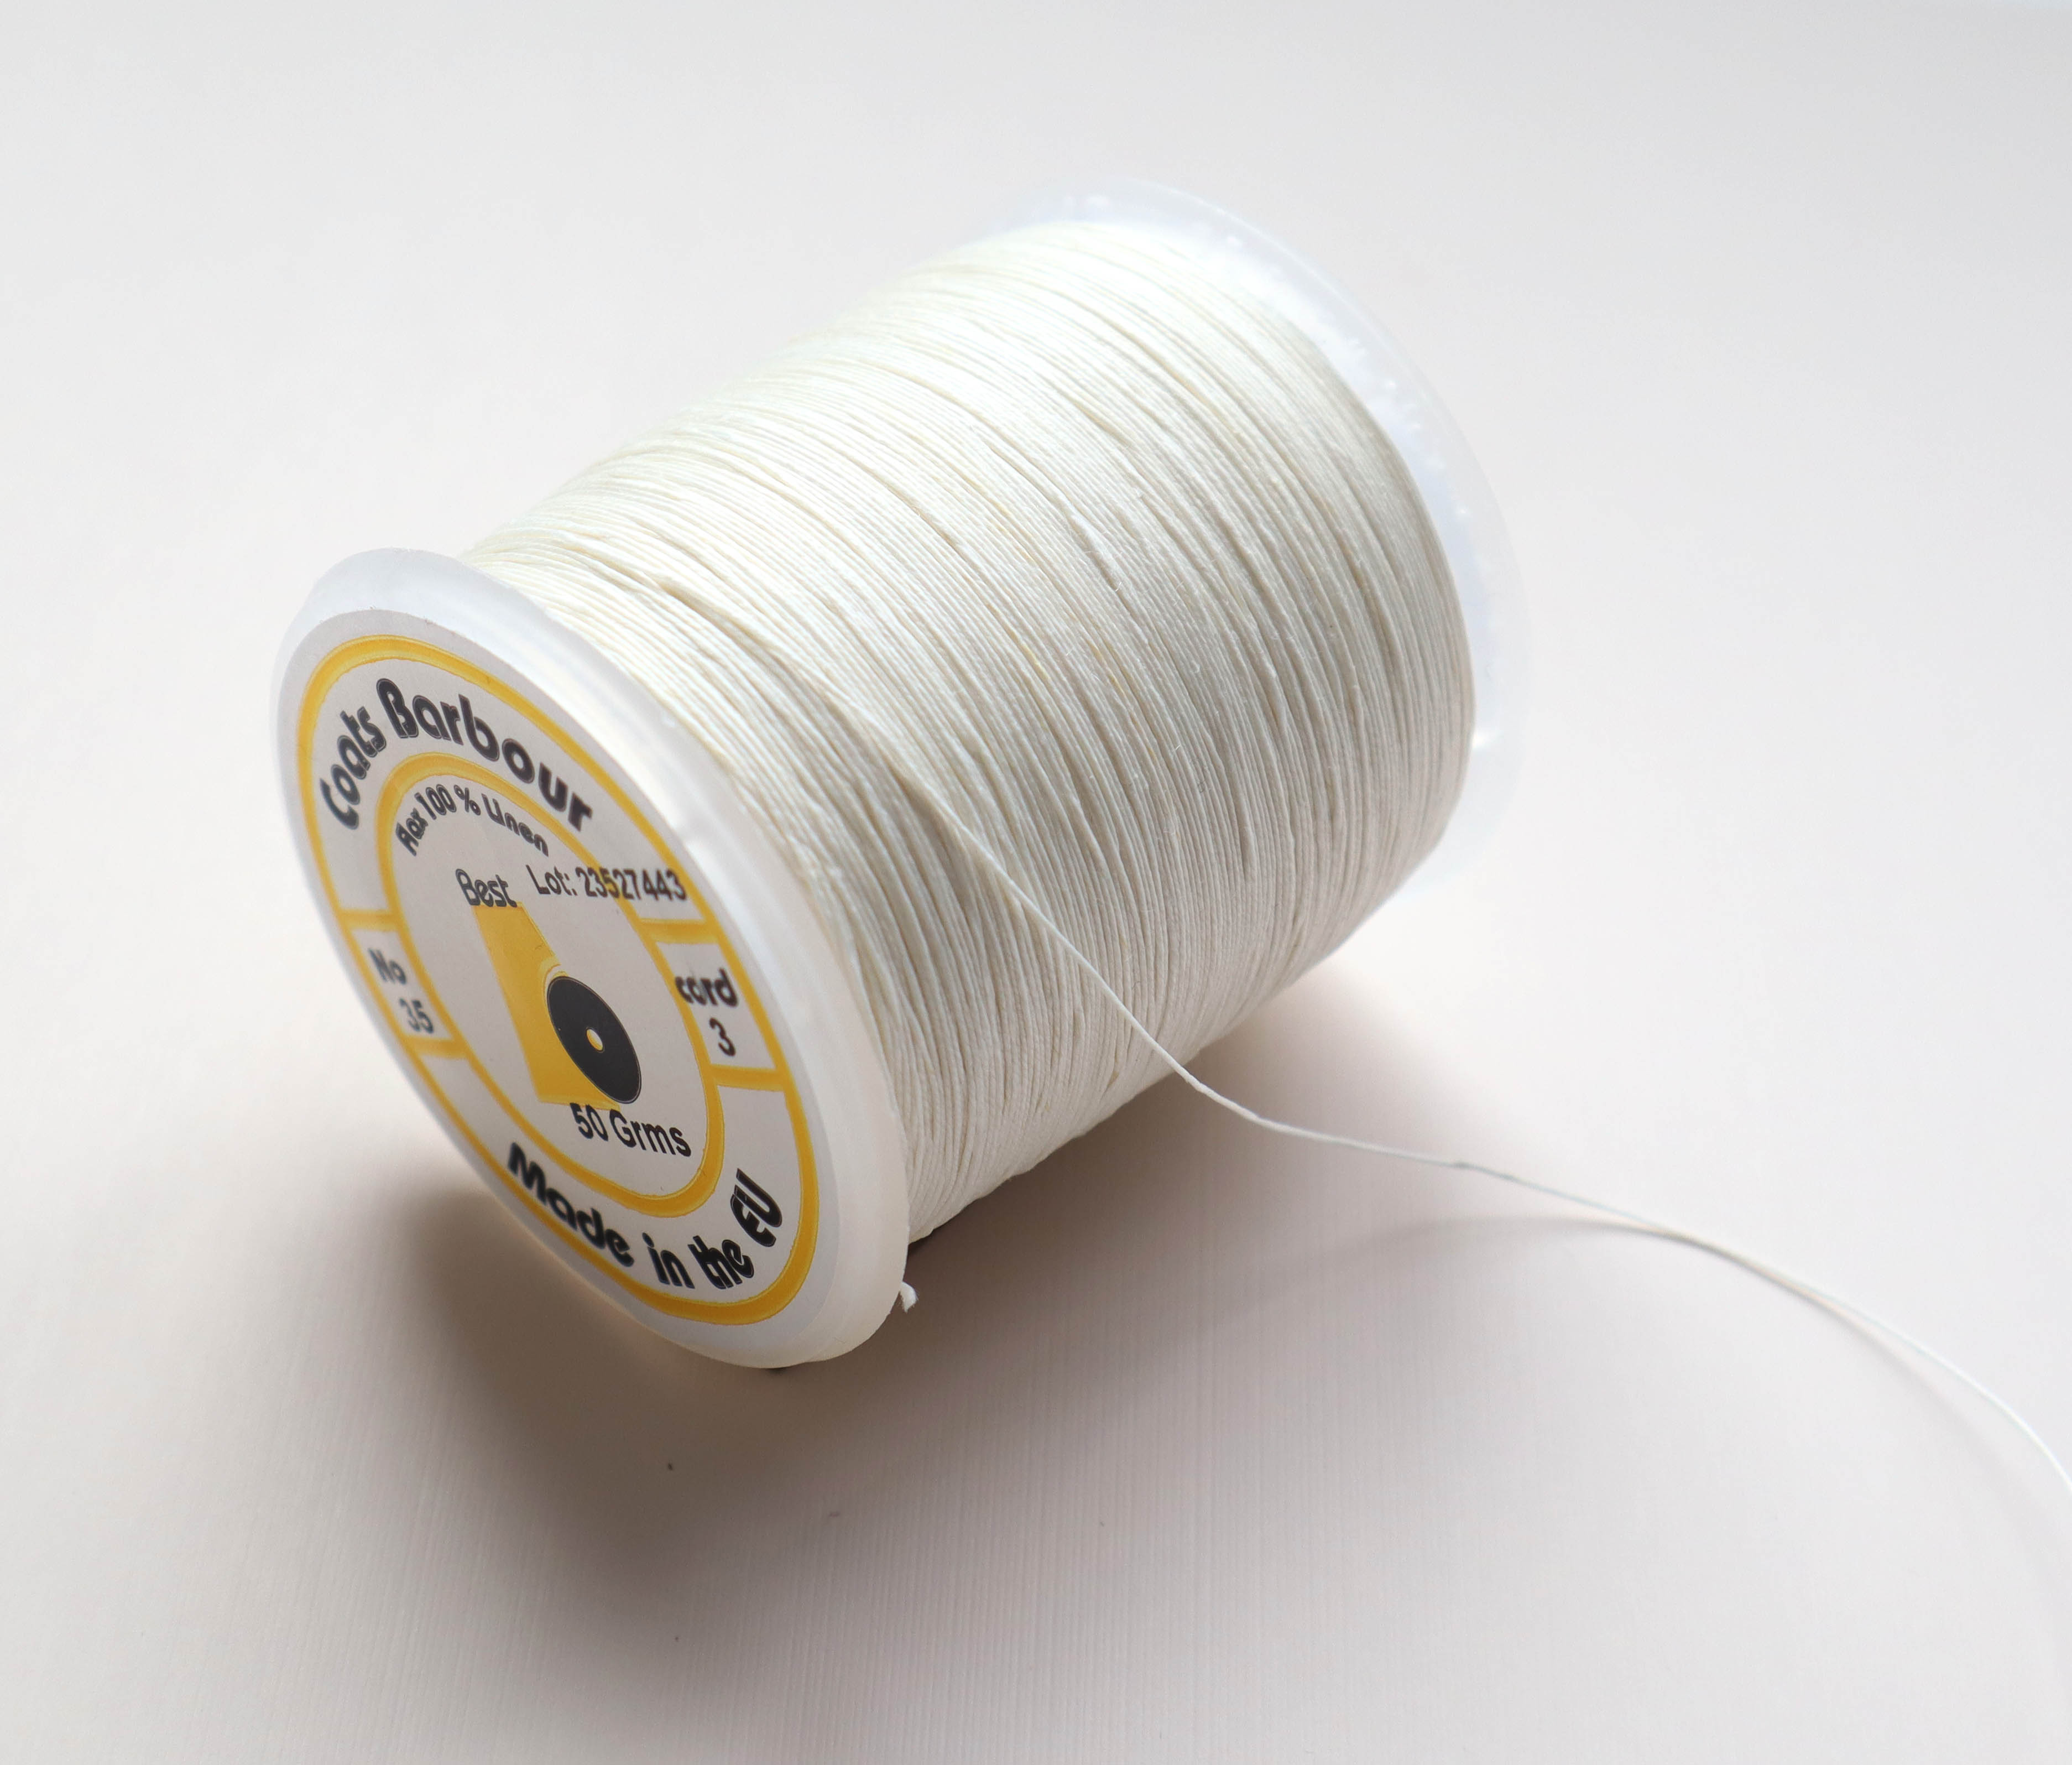 The Difference Between Waxed, Unwaxed and Polished Linen Thread